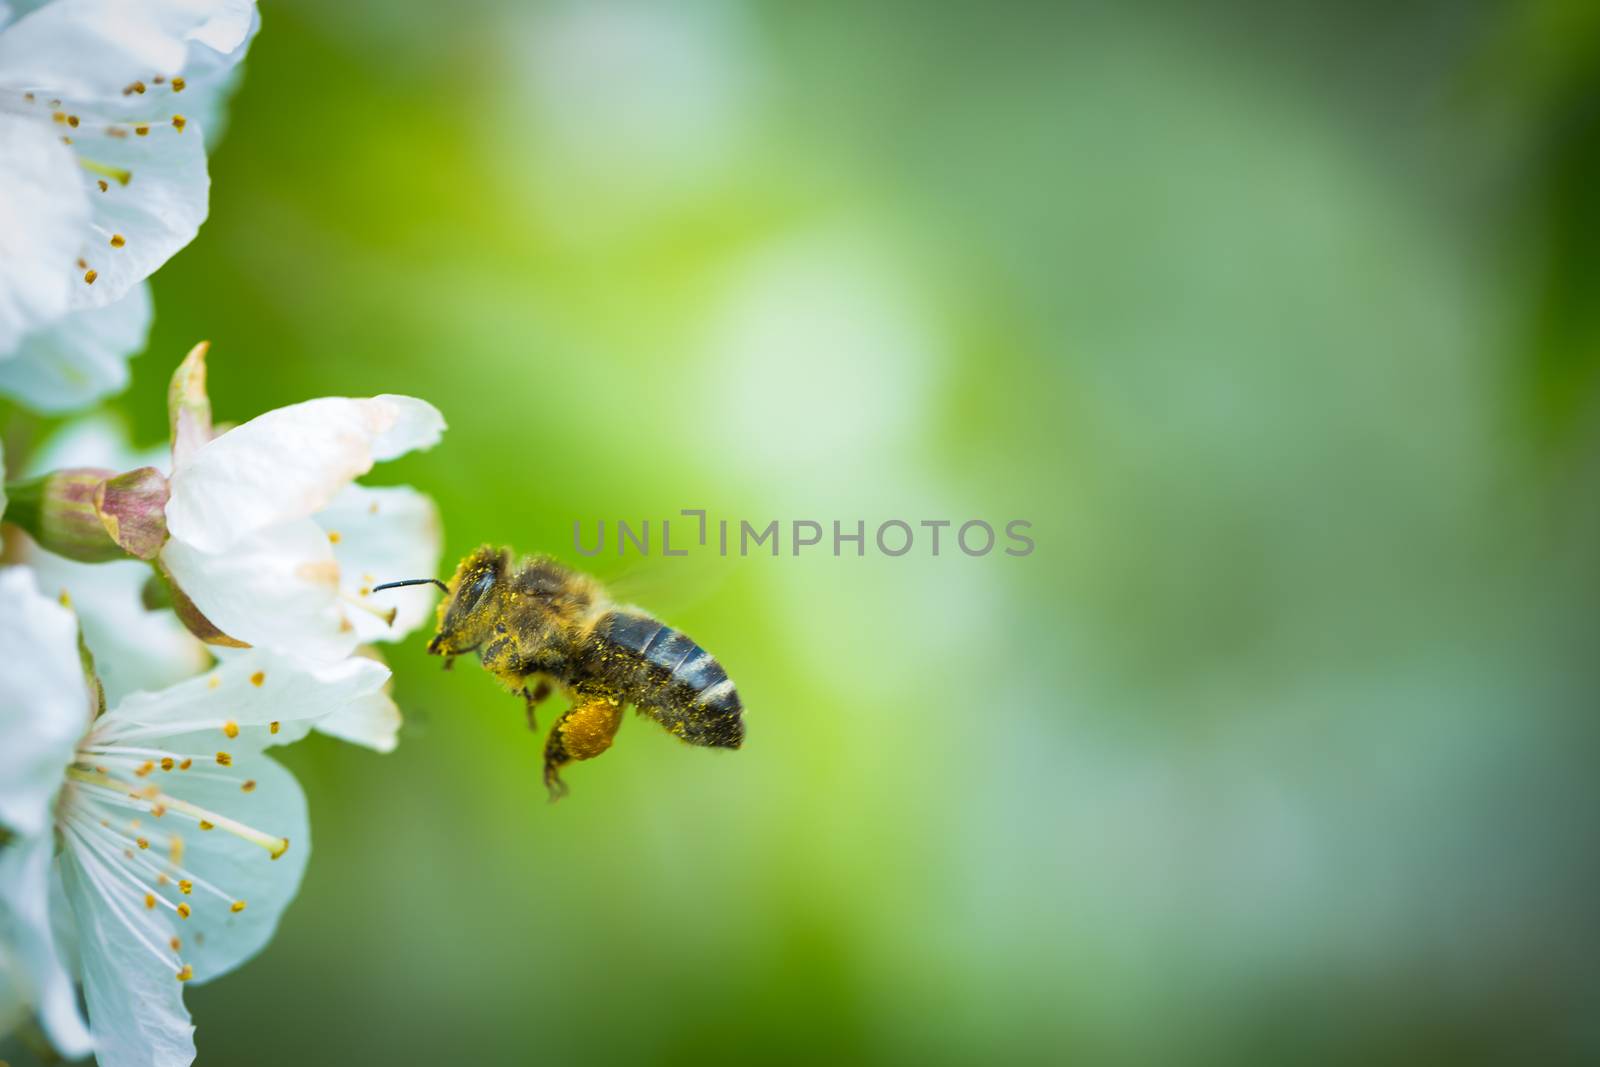 Honey bee in flight approaching blossoming cherry tree